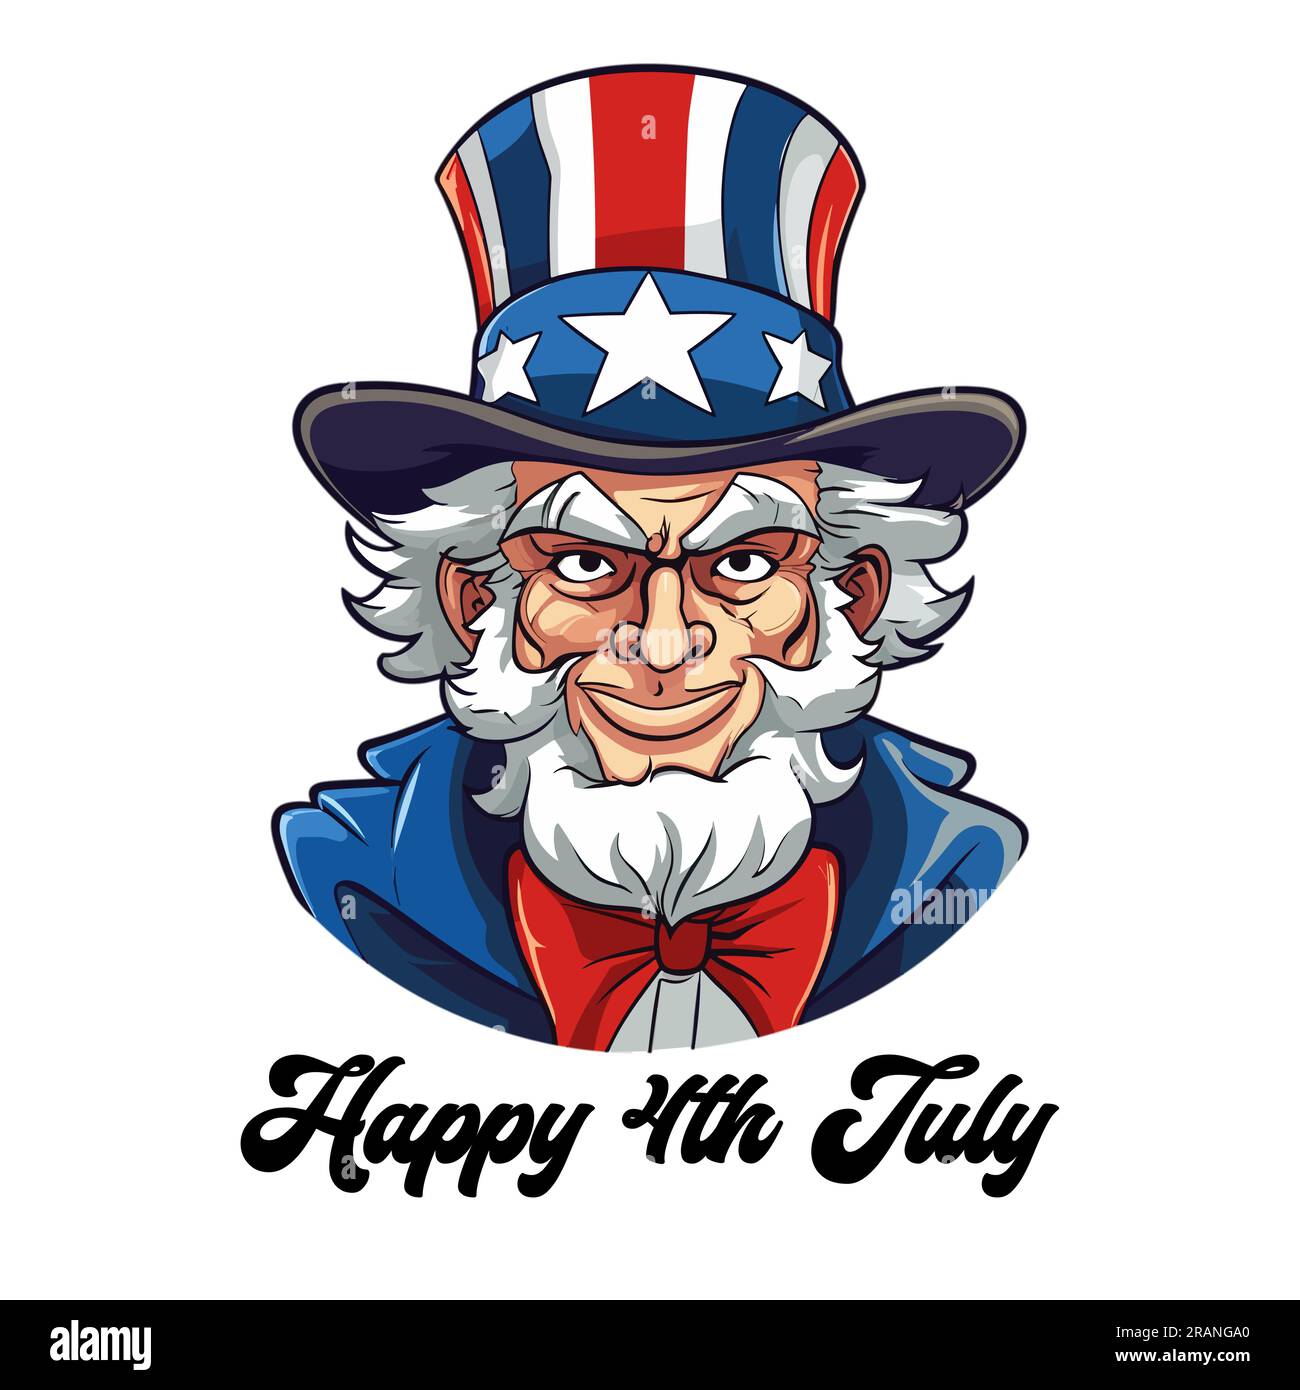 Uncle Sam Happy 4th July Vector Illustration Stock Vector